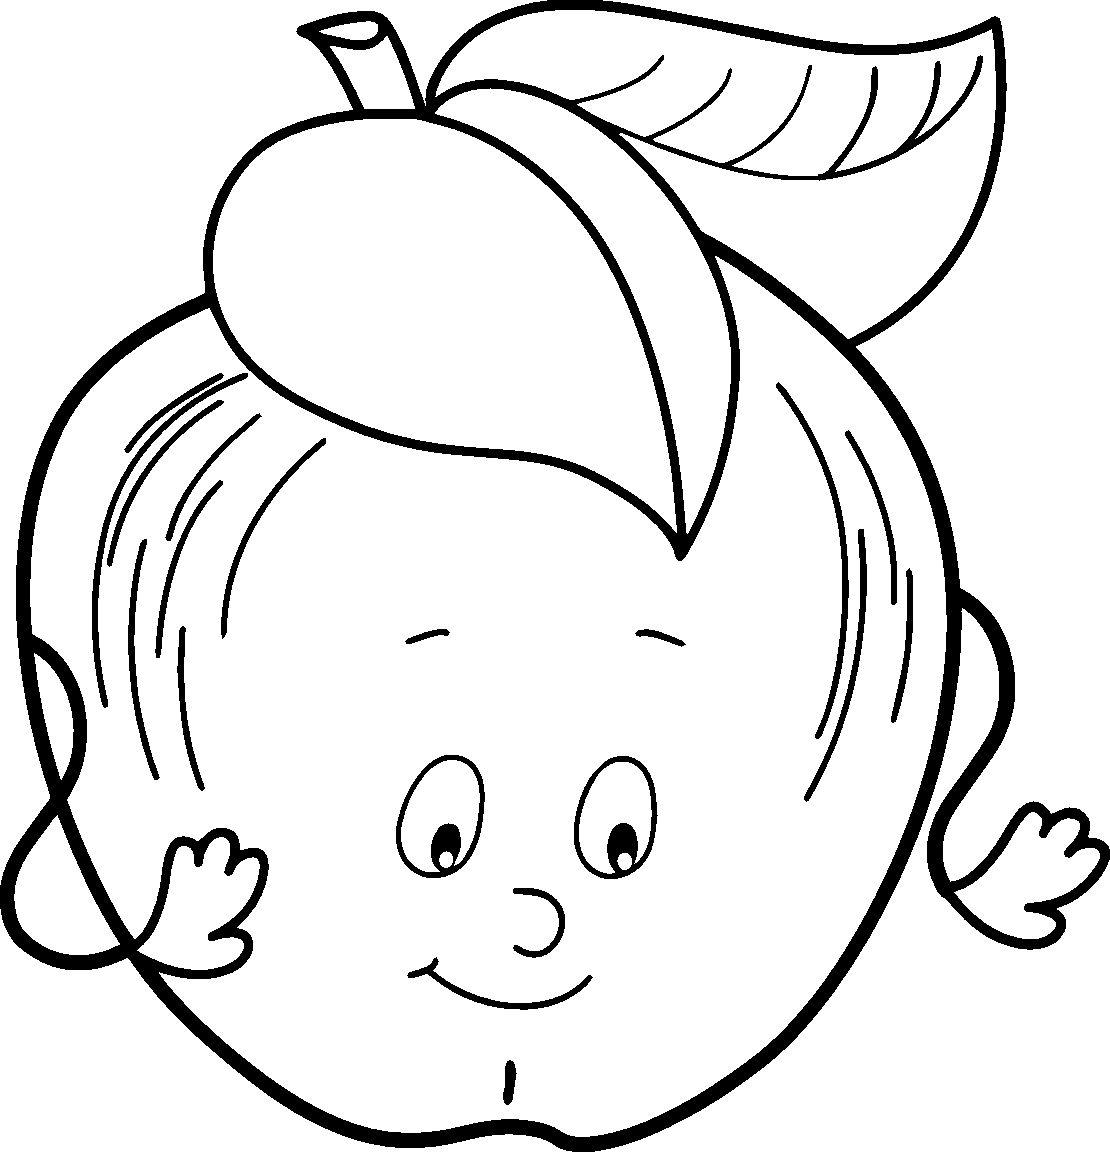 Smiling Apple Coloring Pages